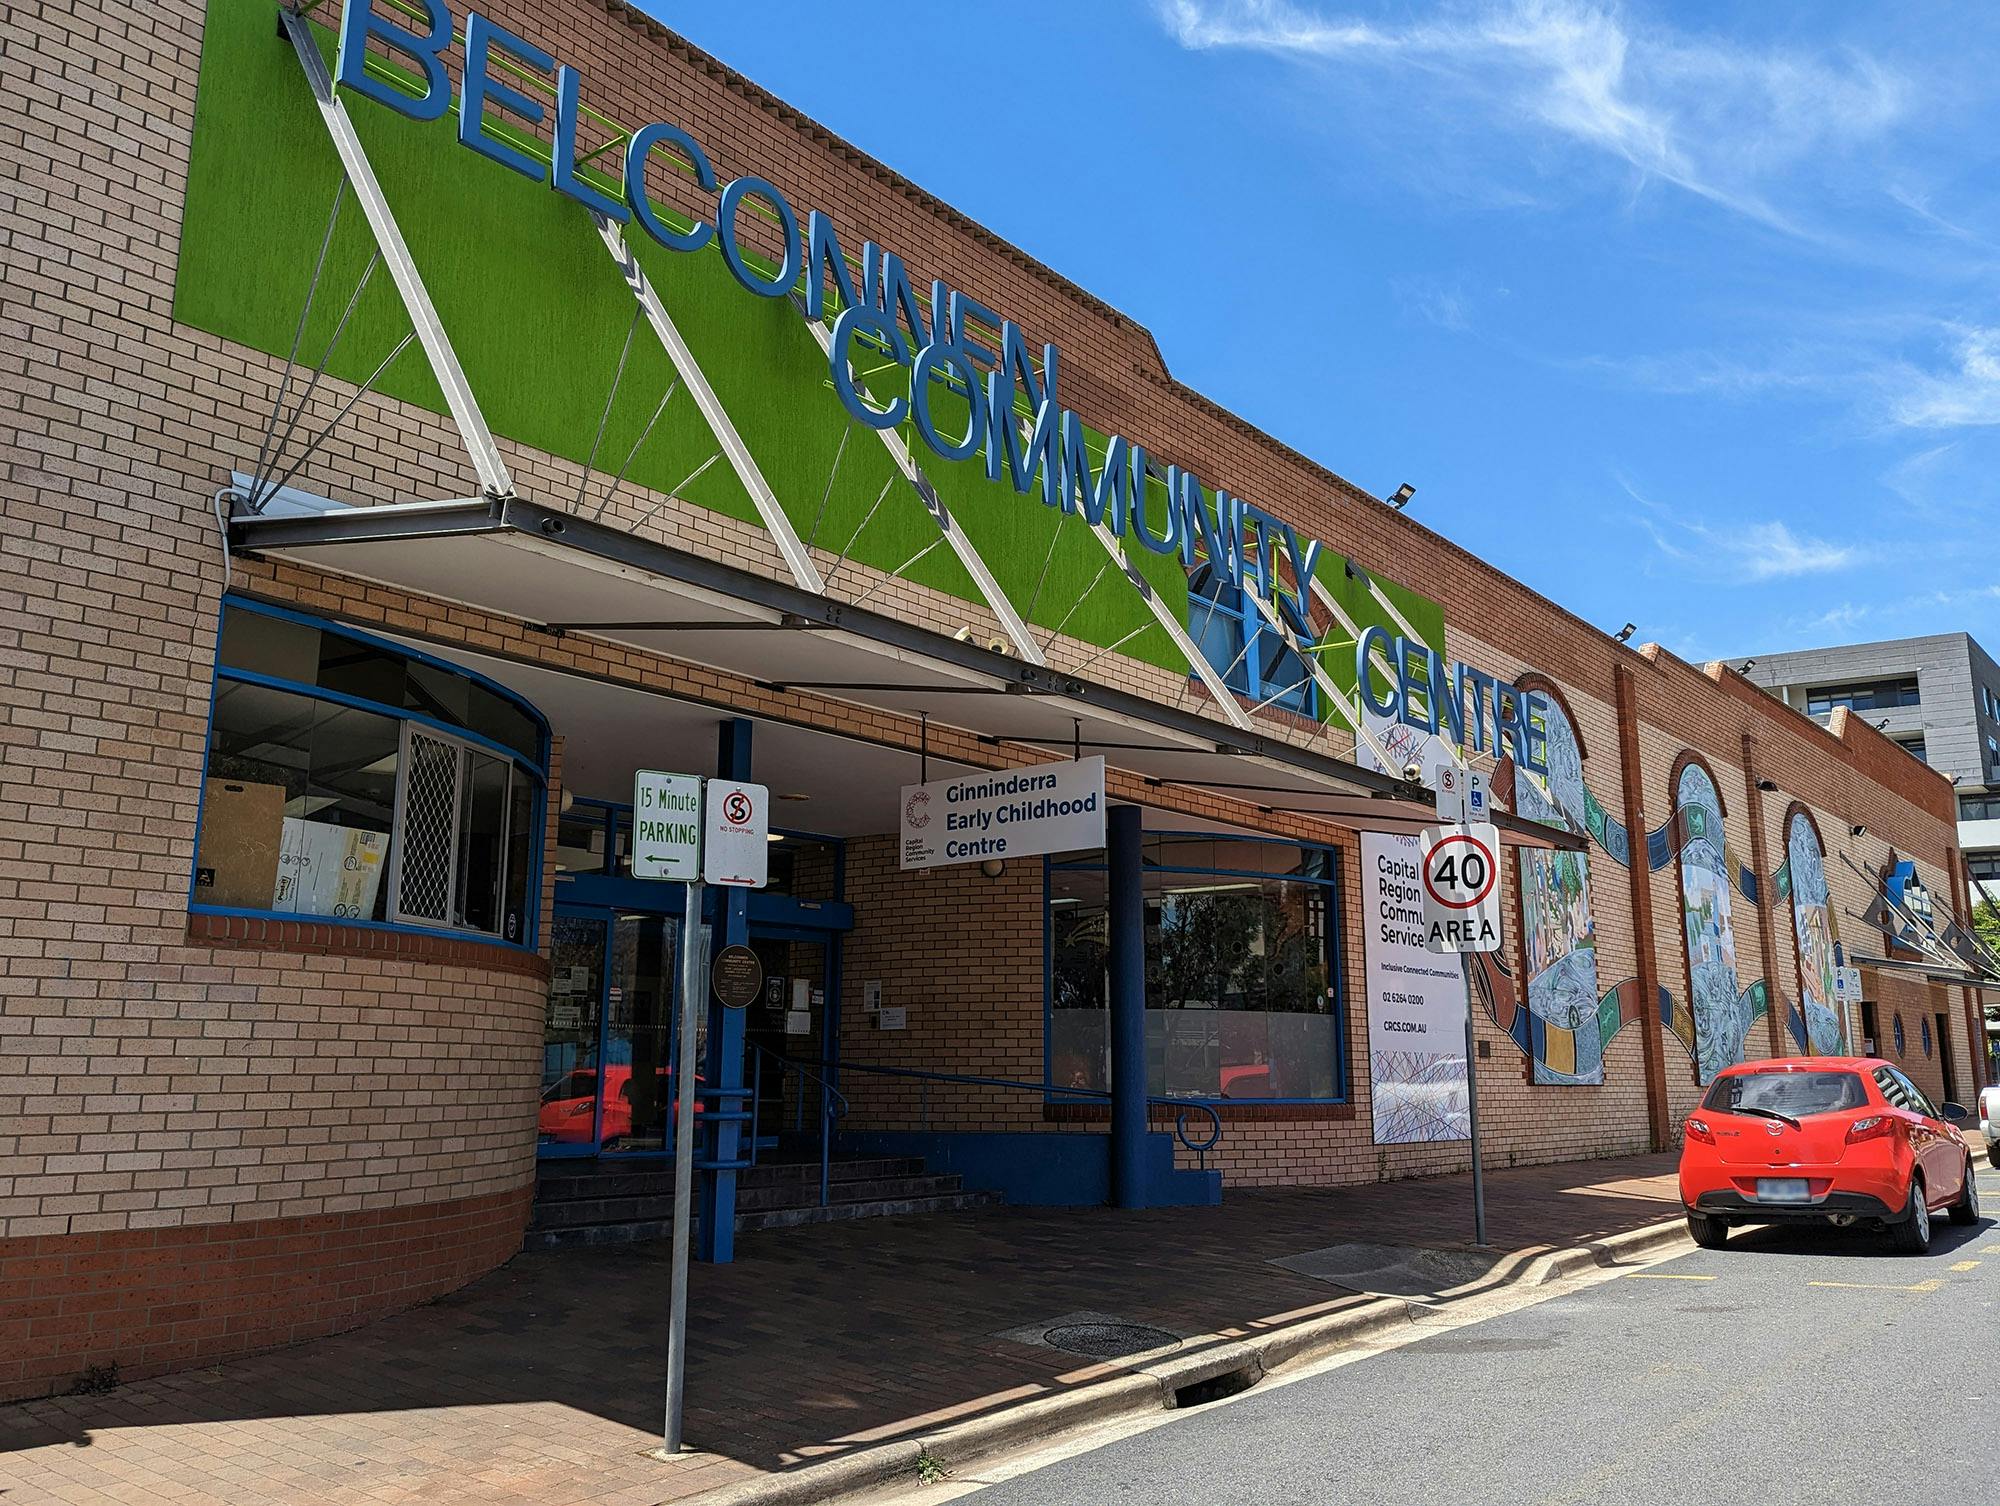 The main entrance to the Belconnen Community Centre